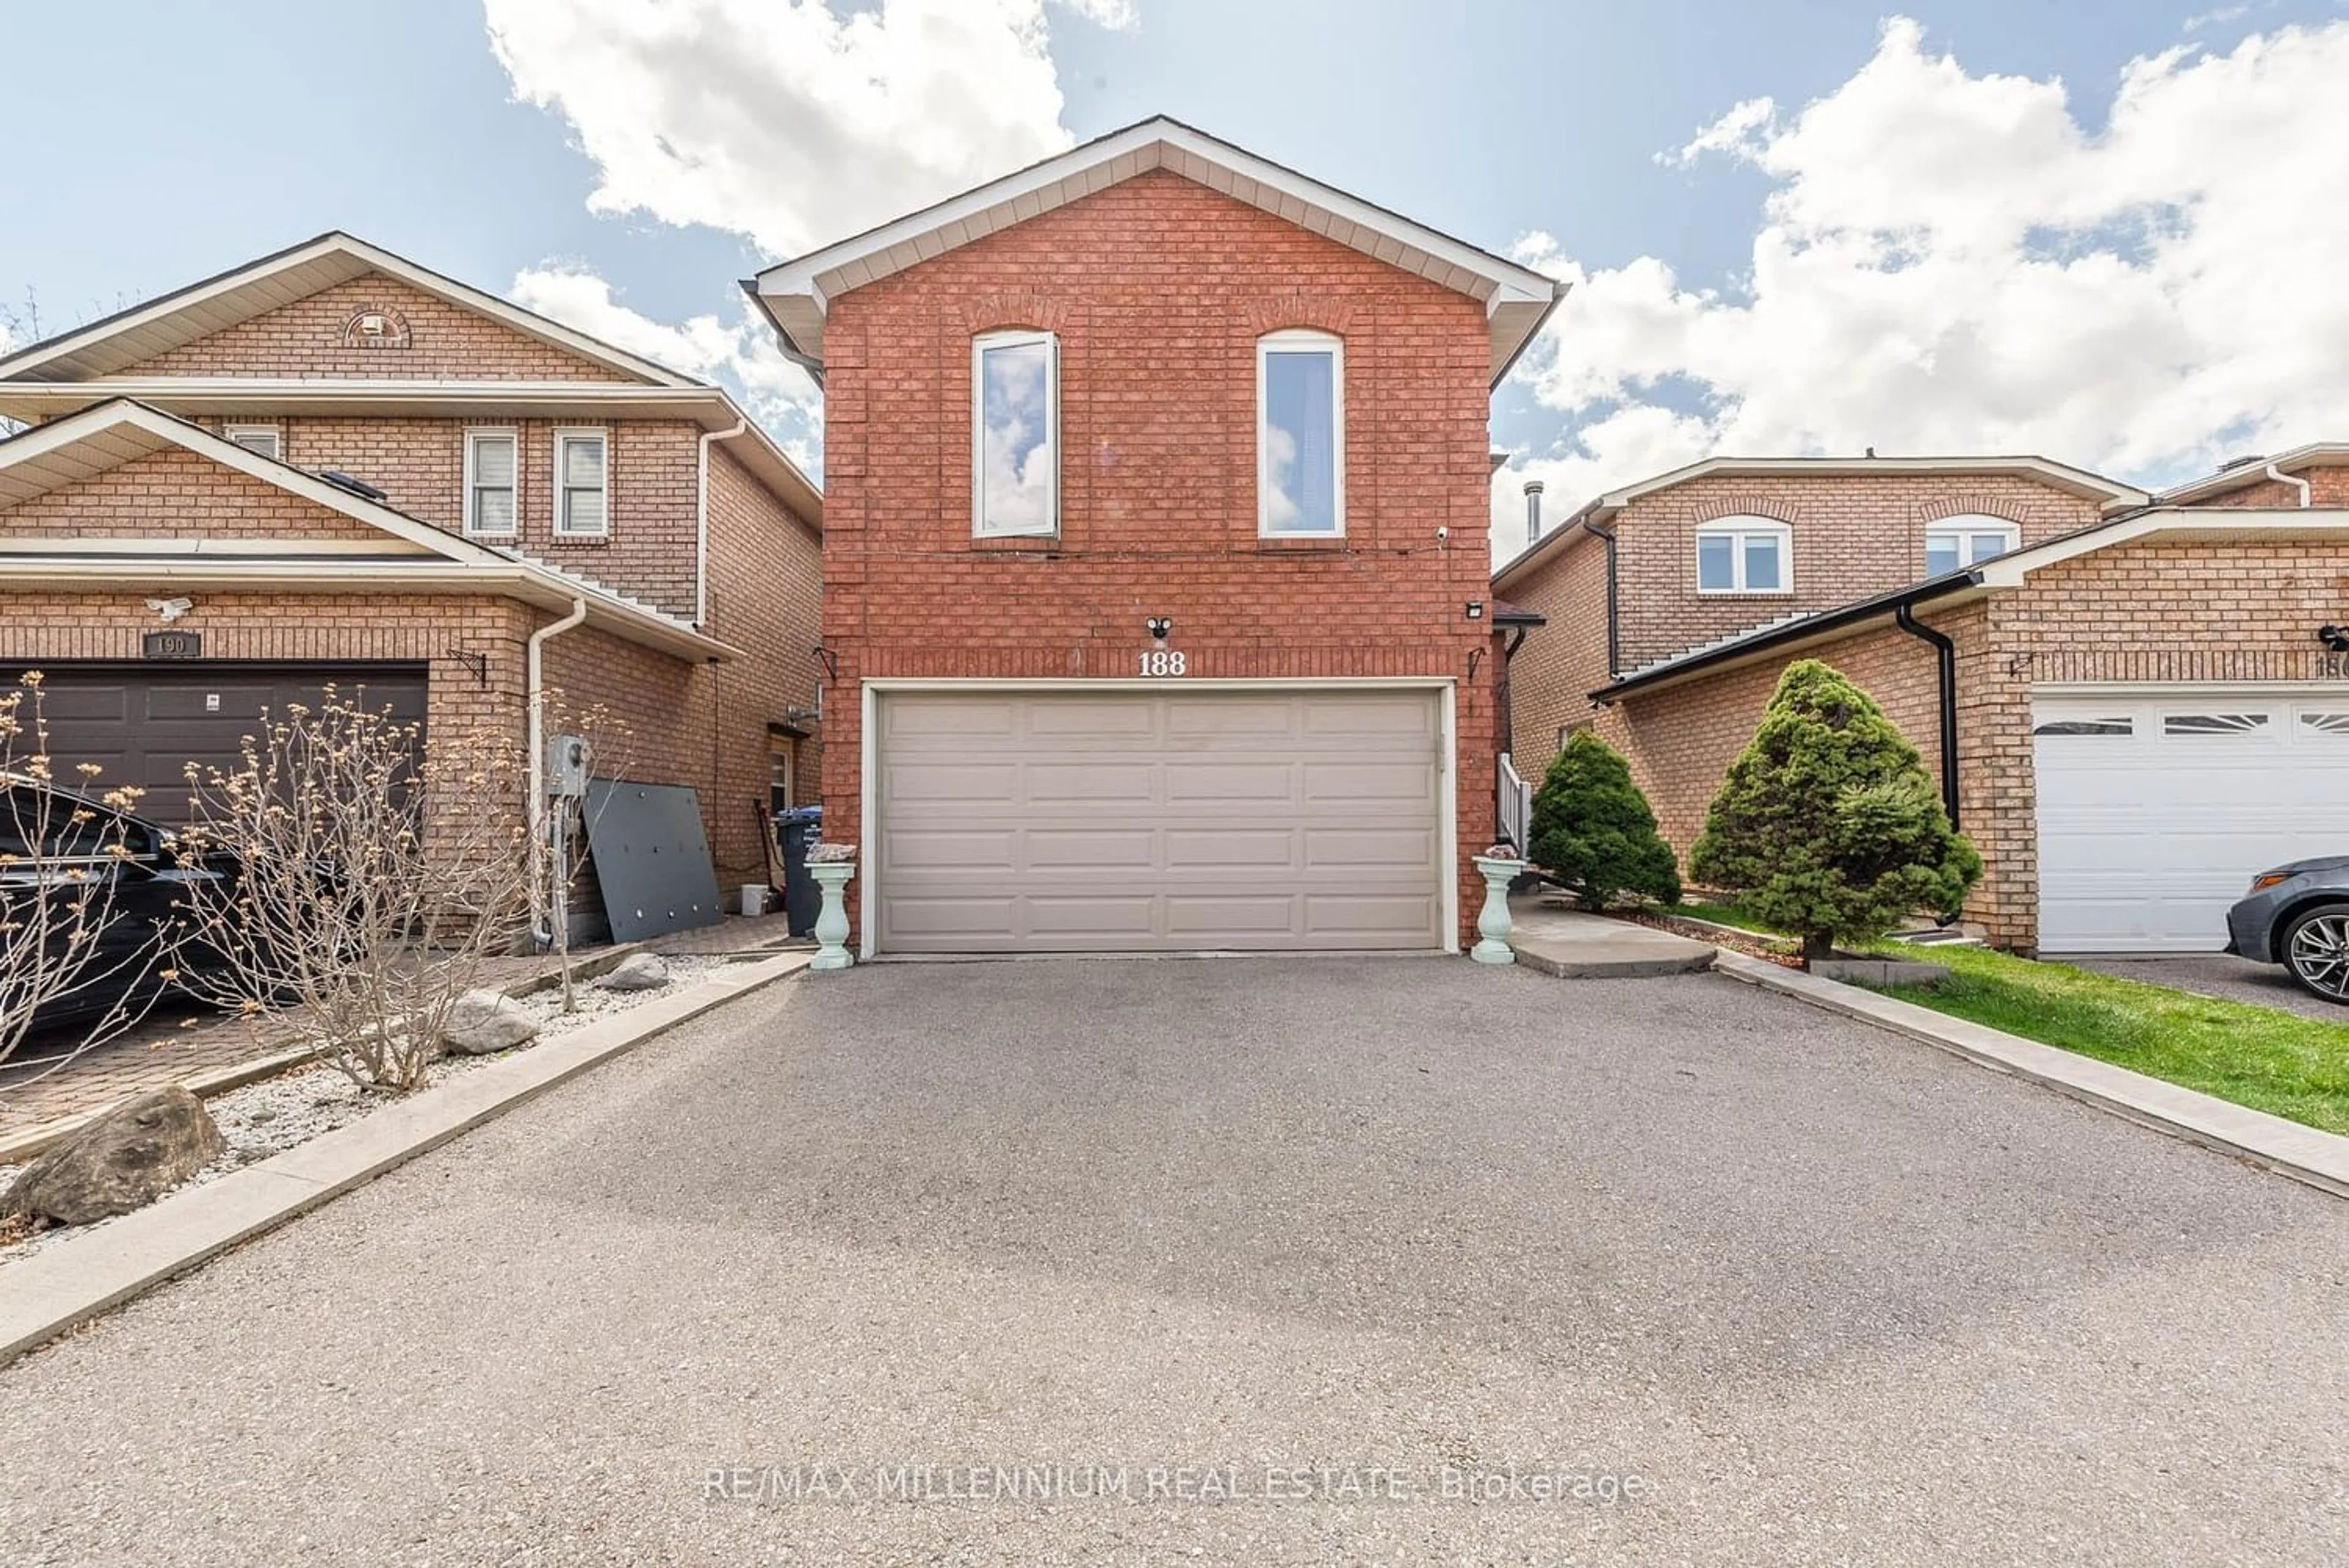 Home with brick exterior material for 188 Richvale Dr, Brampton Ontario L6Z 4L5